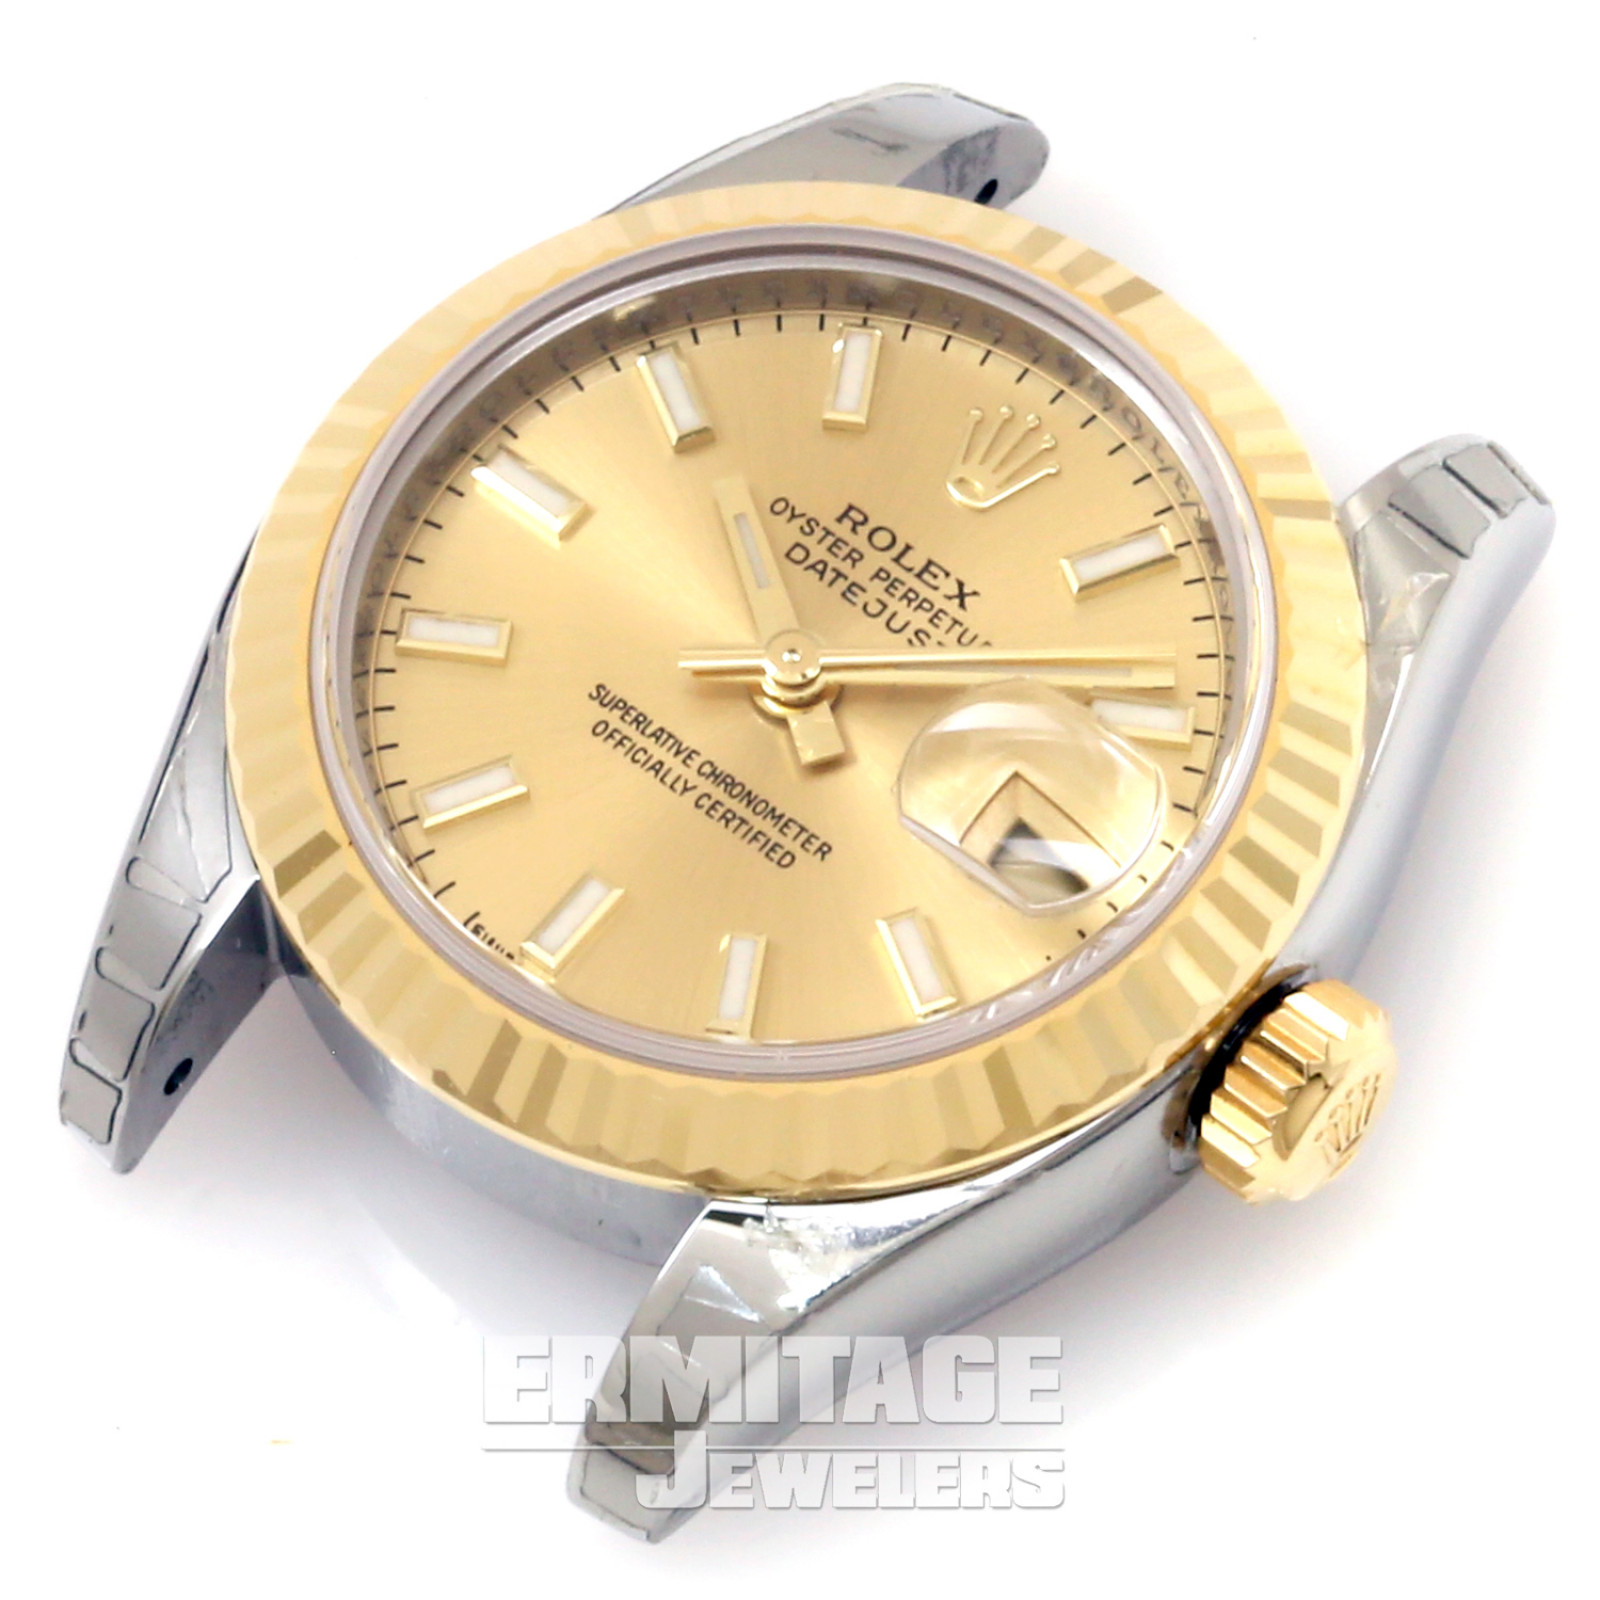 Rolex Datejust 179173 with Champagne Dial